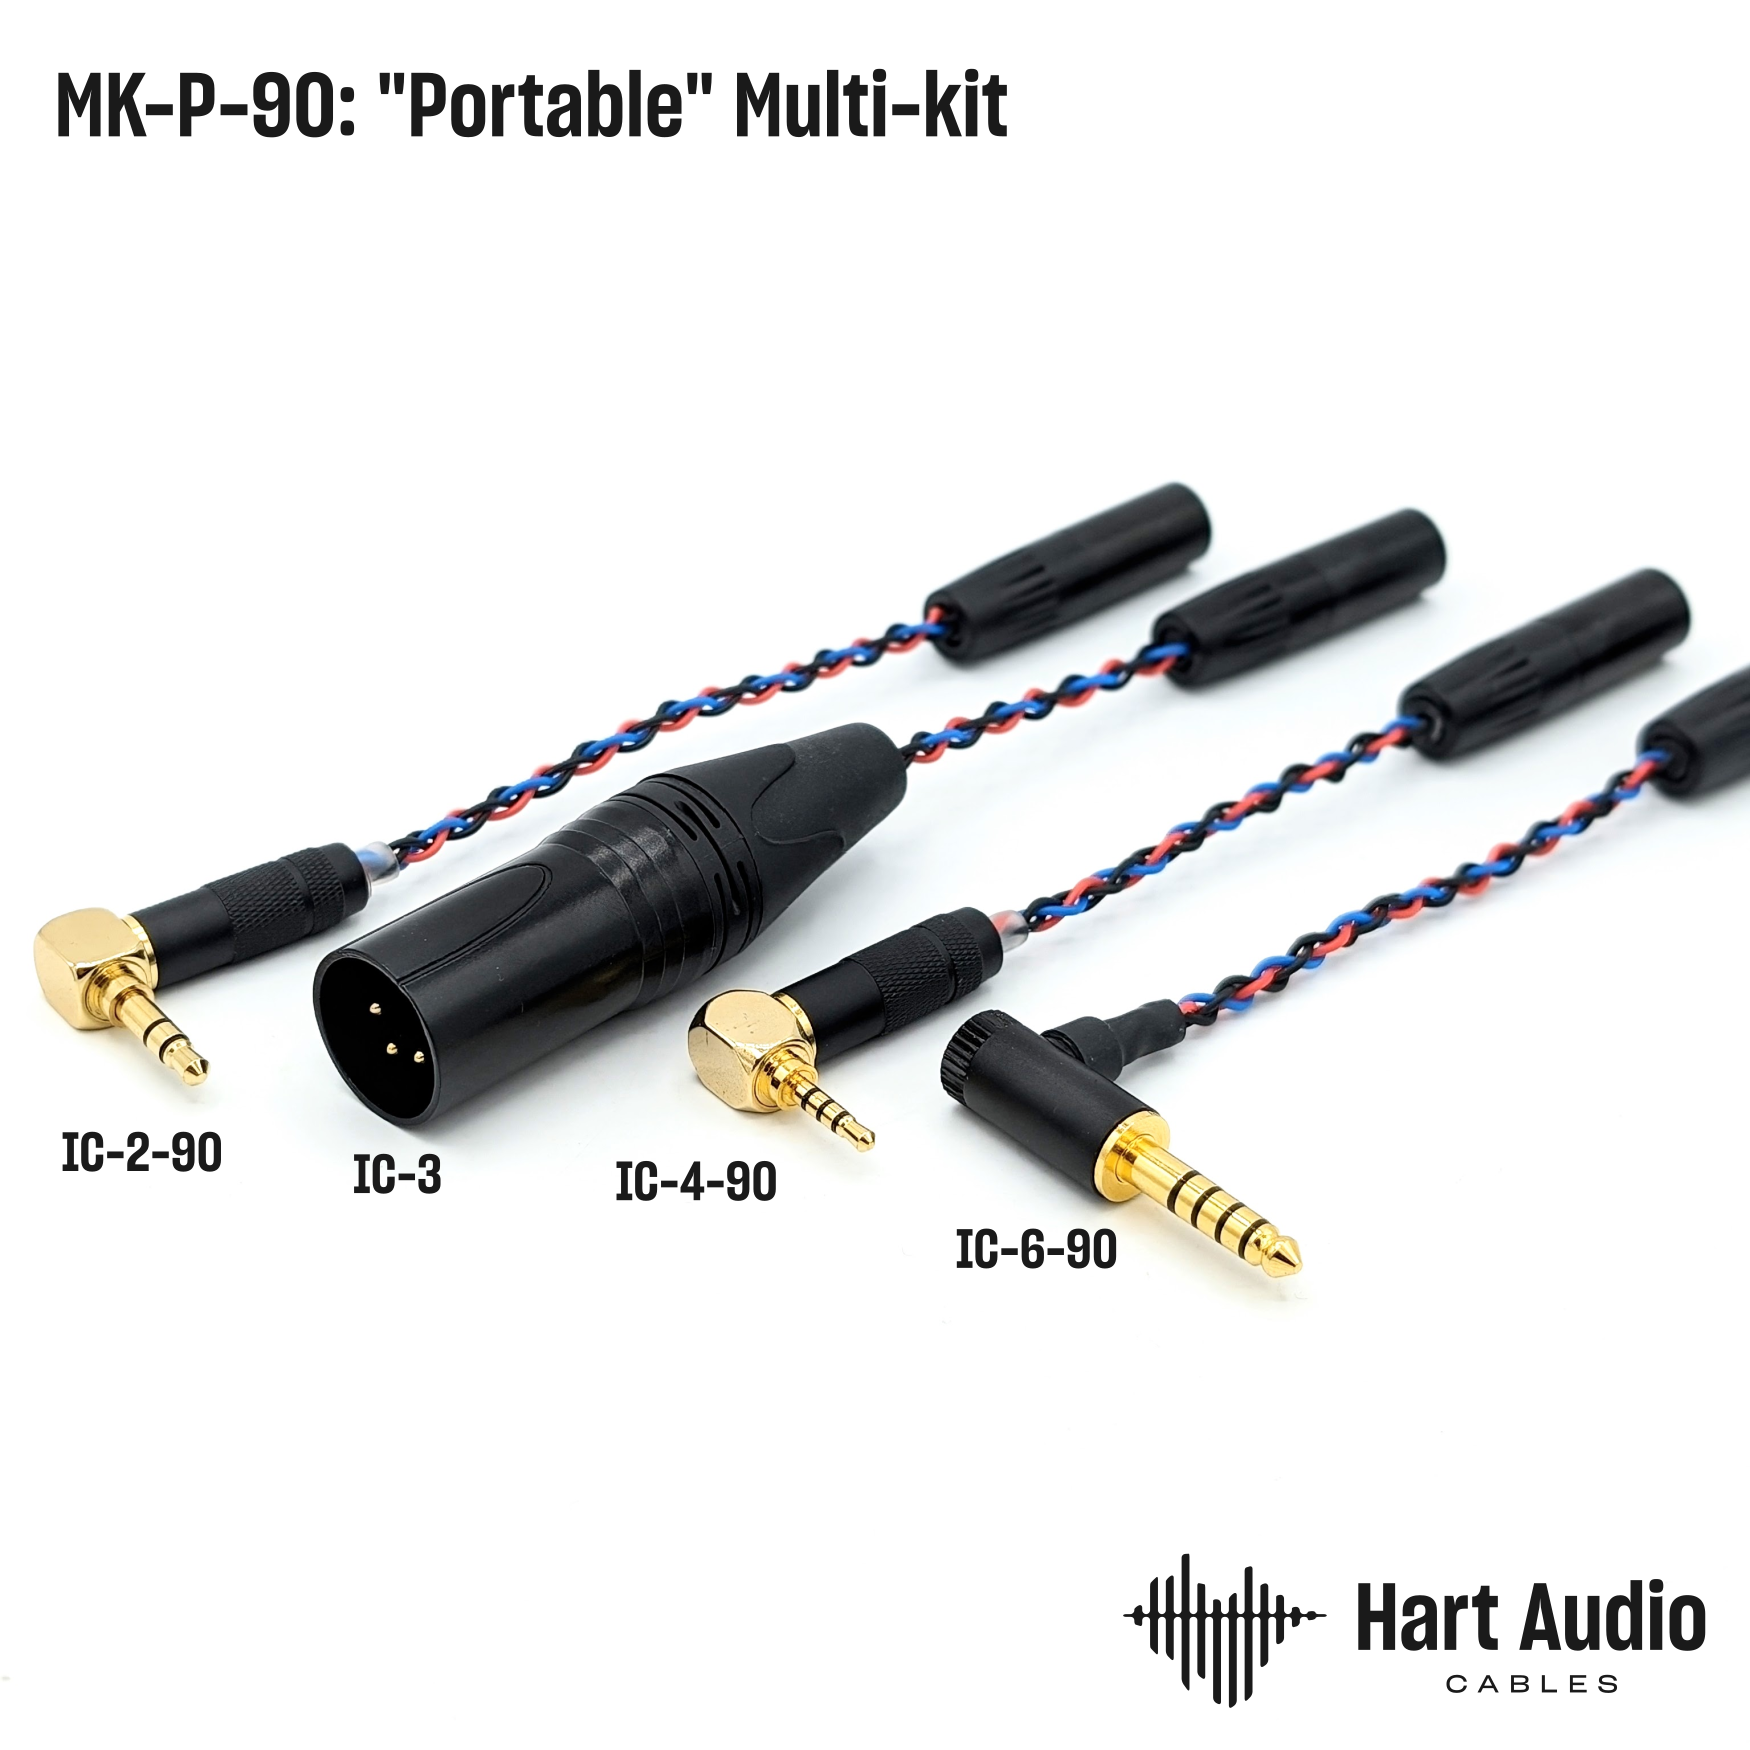 PC-5-NK: Dual MMCX balanced modular IEM Cable for IE400pro / 500 + more